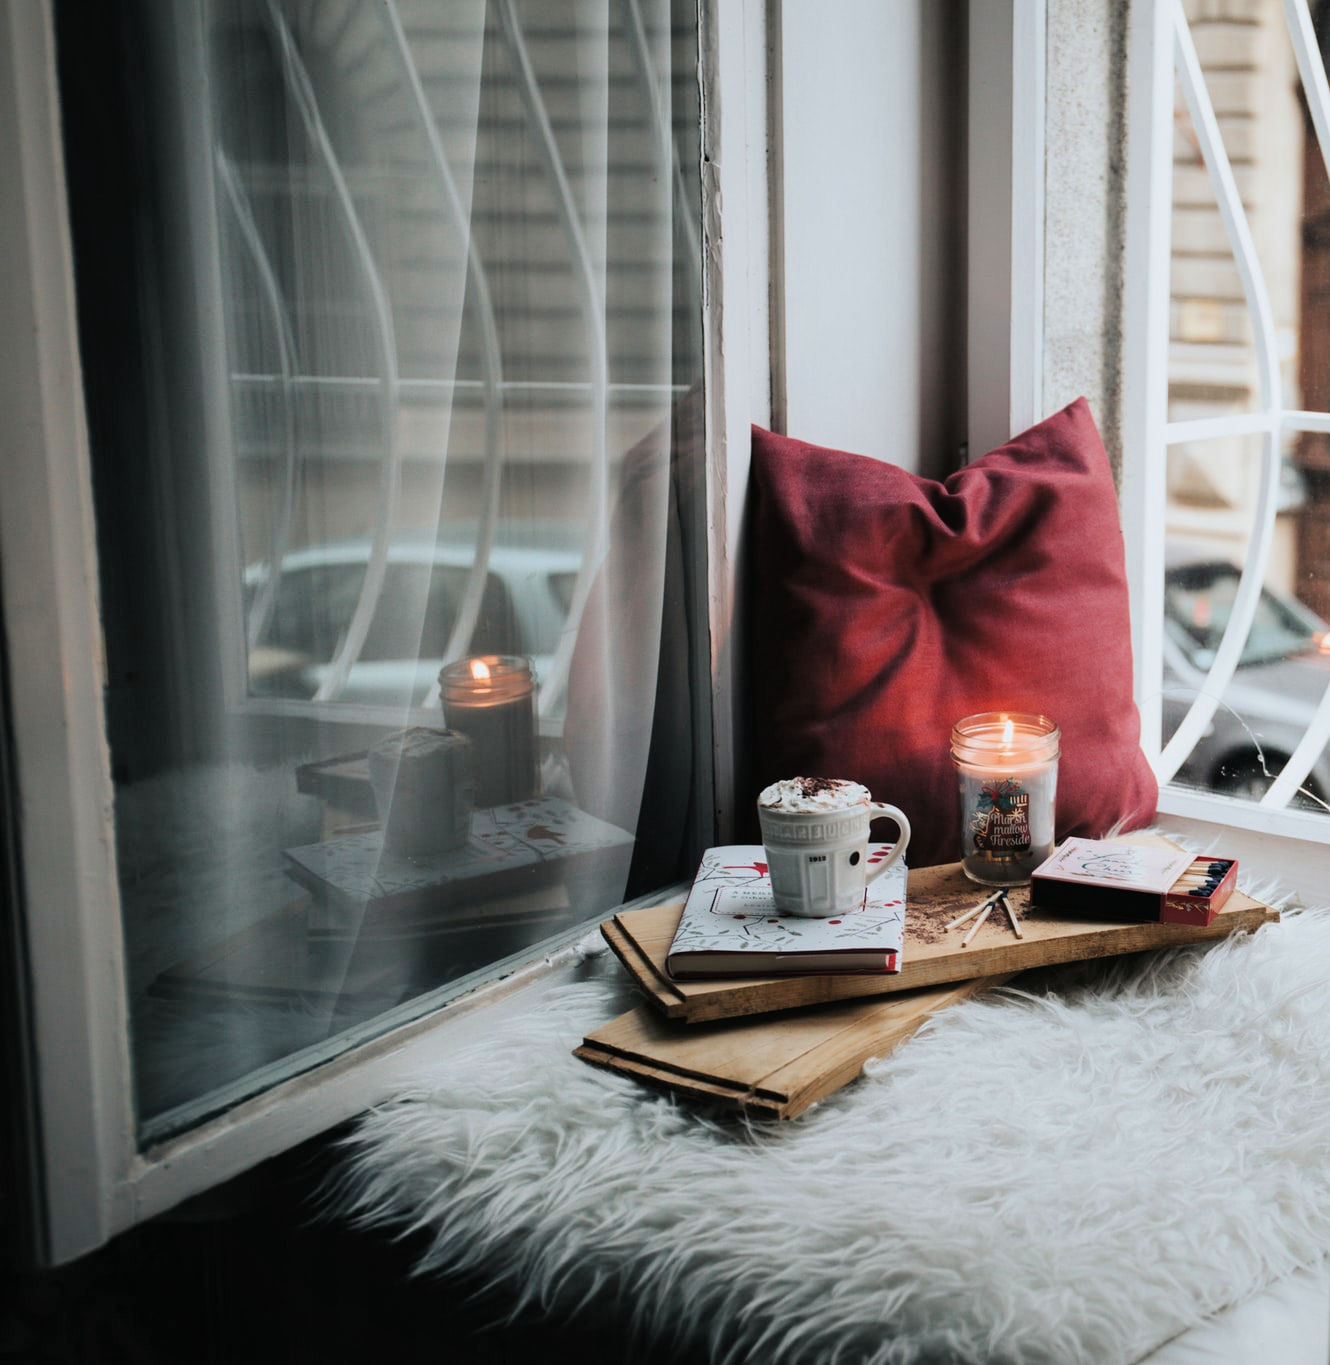 Ways to practice self care when staying at home